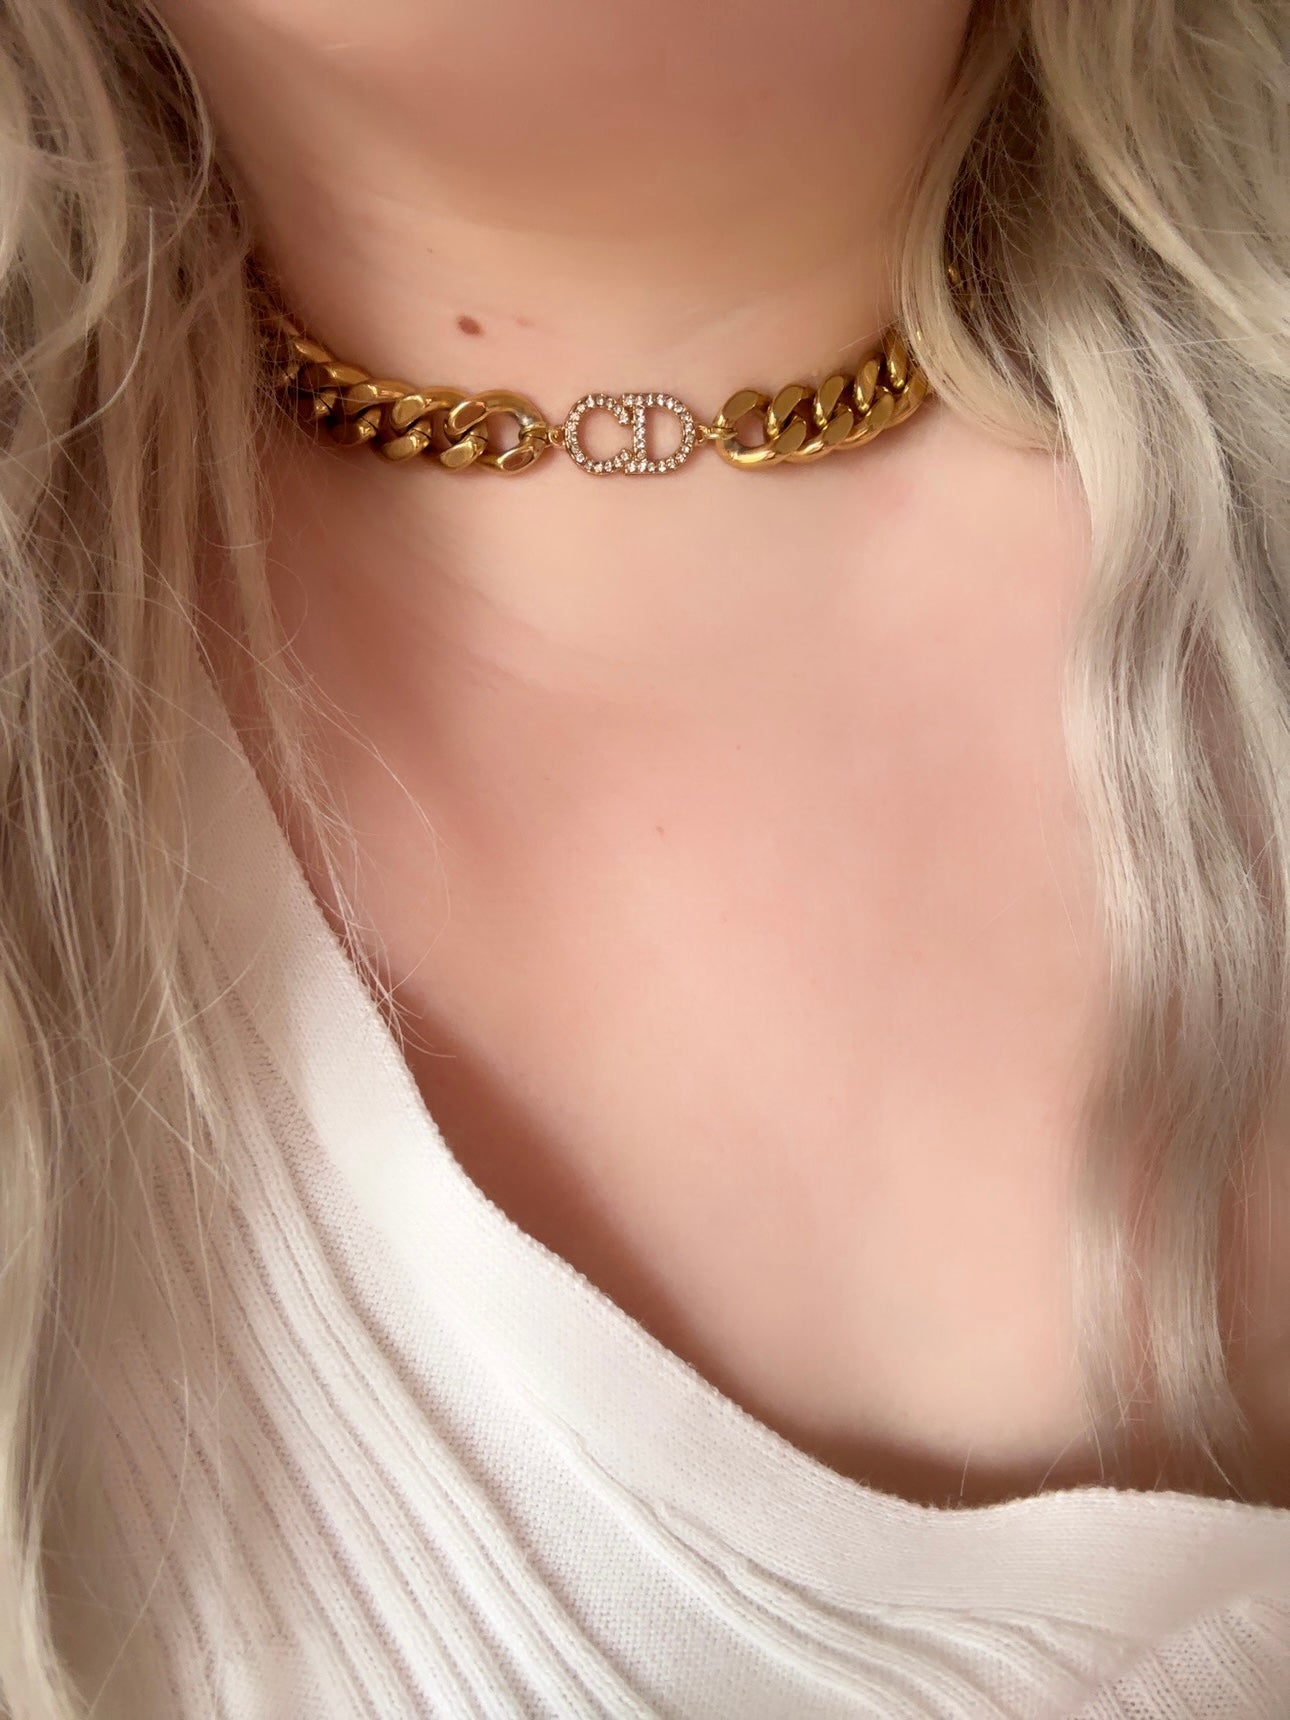 The “CD Choker” Necklace